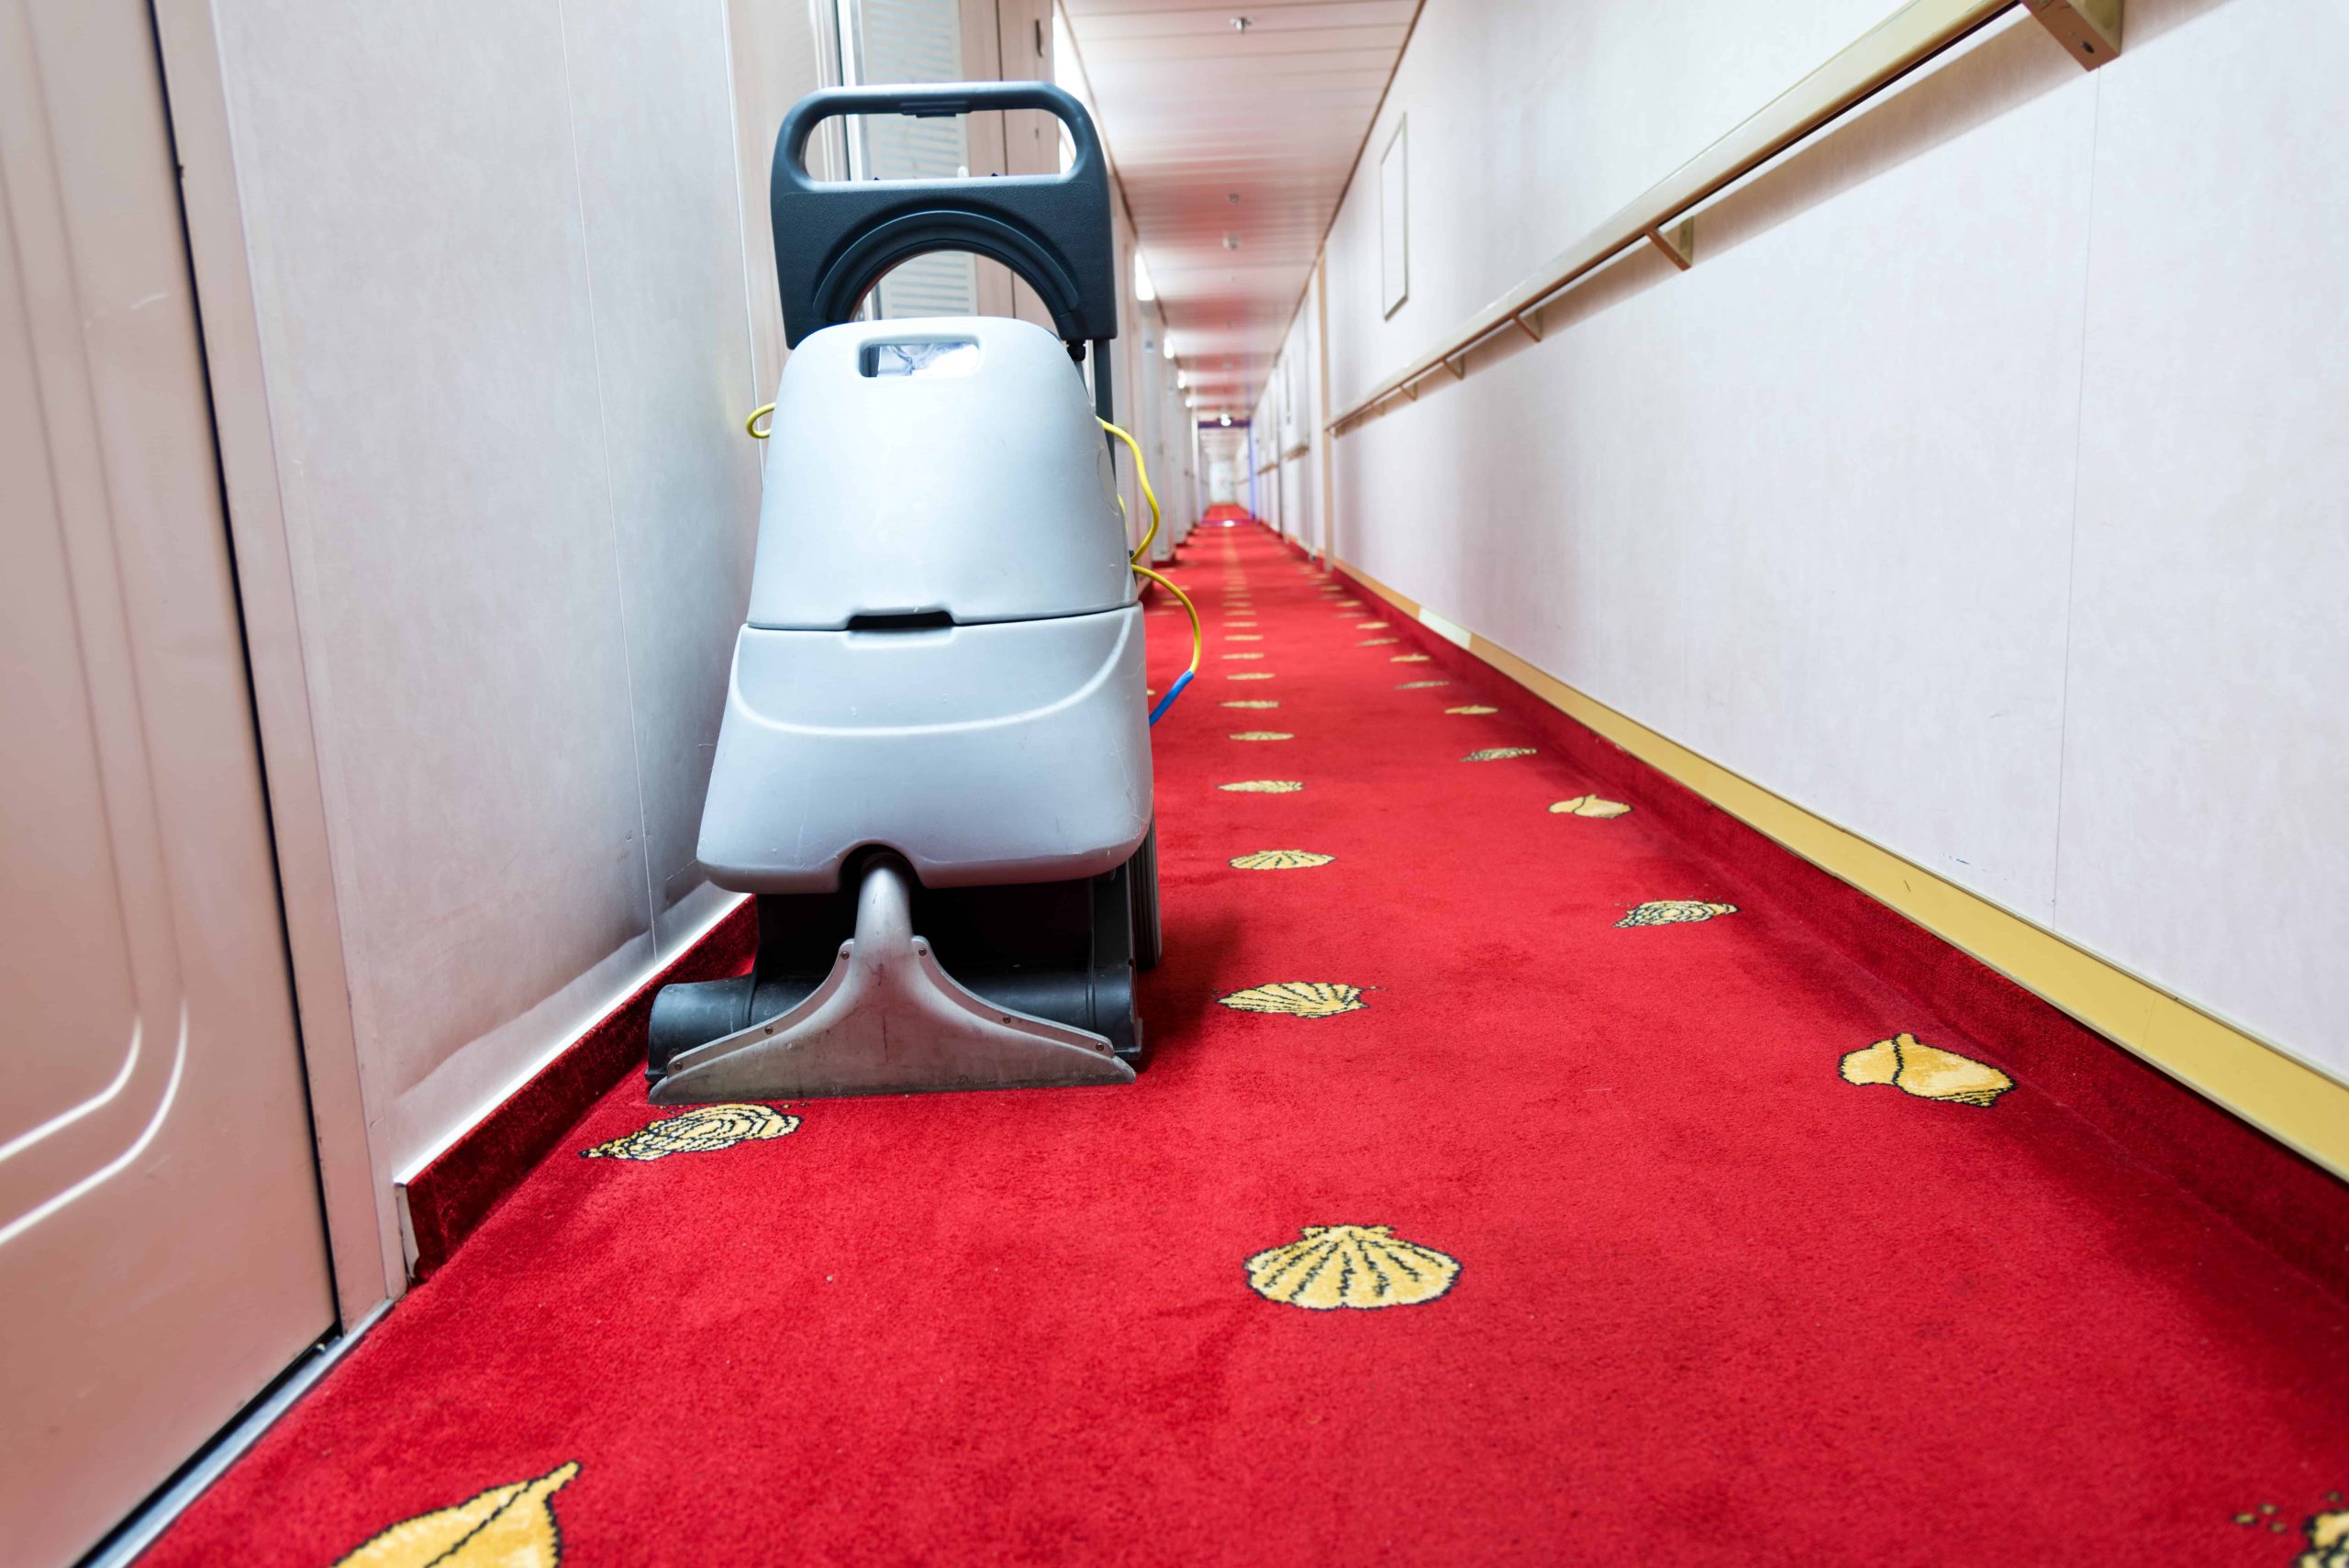 Carpet Cleaning San Diego - One Source Inc.